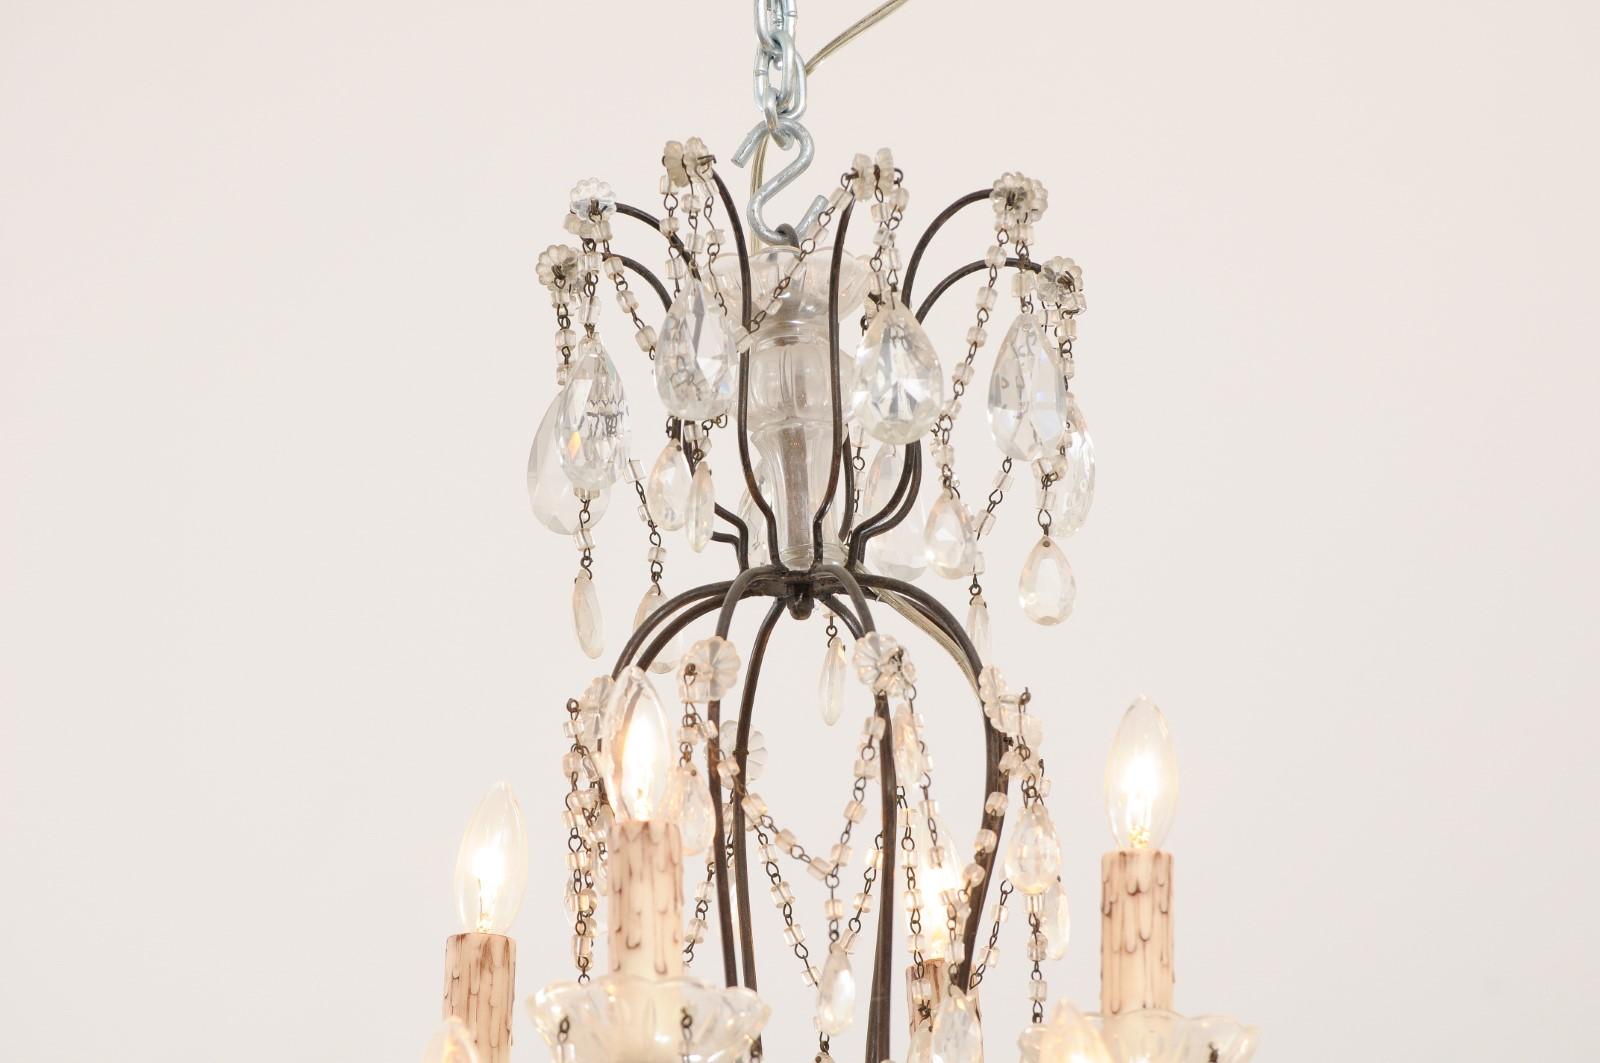 Italian 19th Century 10-Light Crystal and Iron Chandelier with Scrolling Arms In Good Condition For Sale In Atlanta, GA